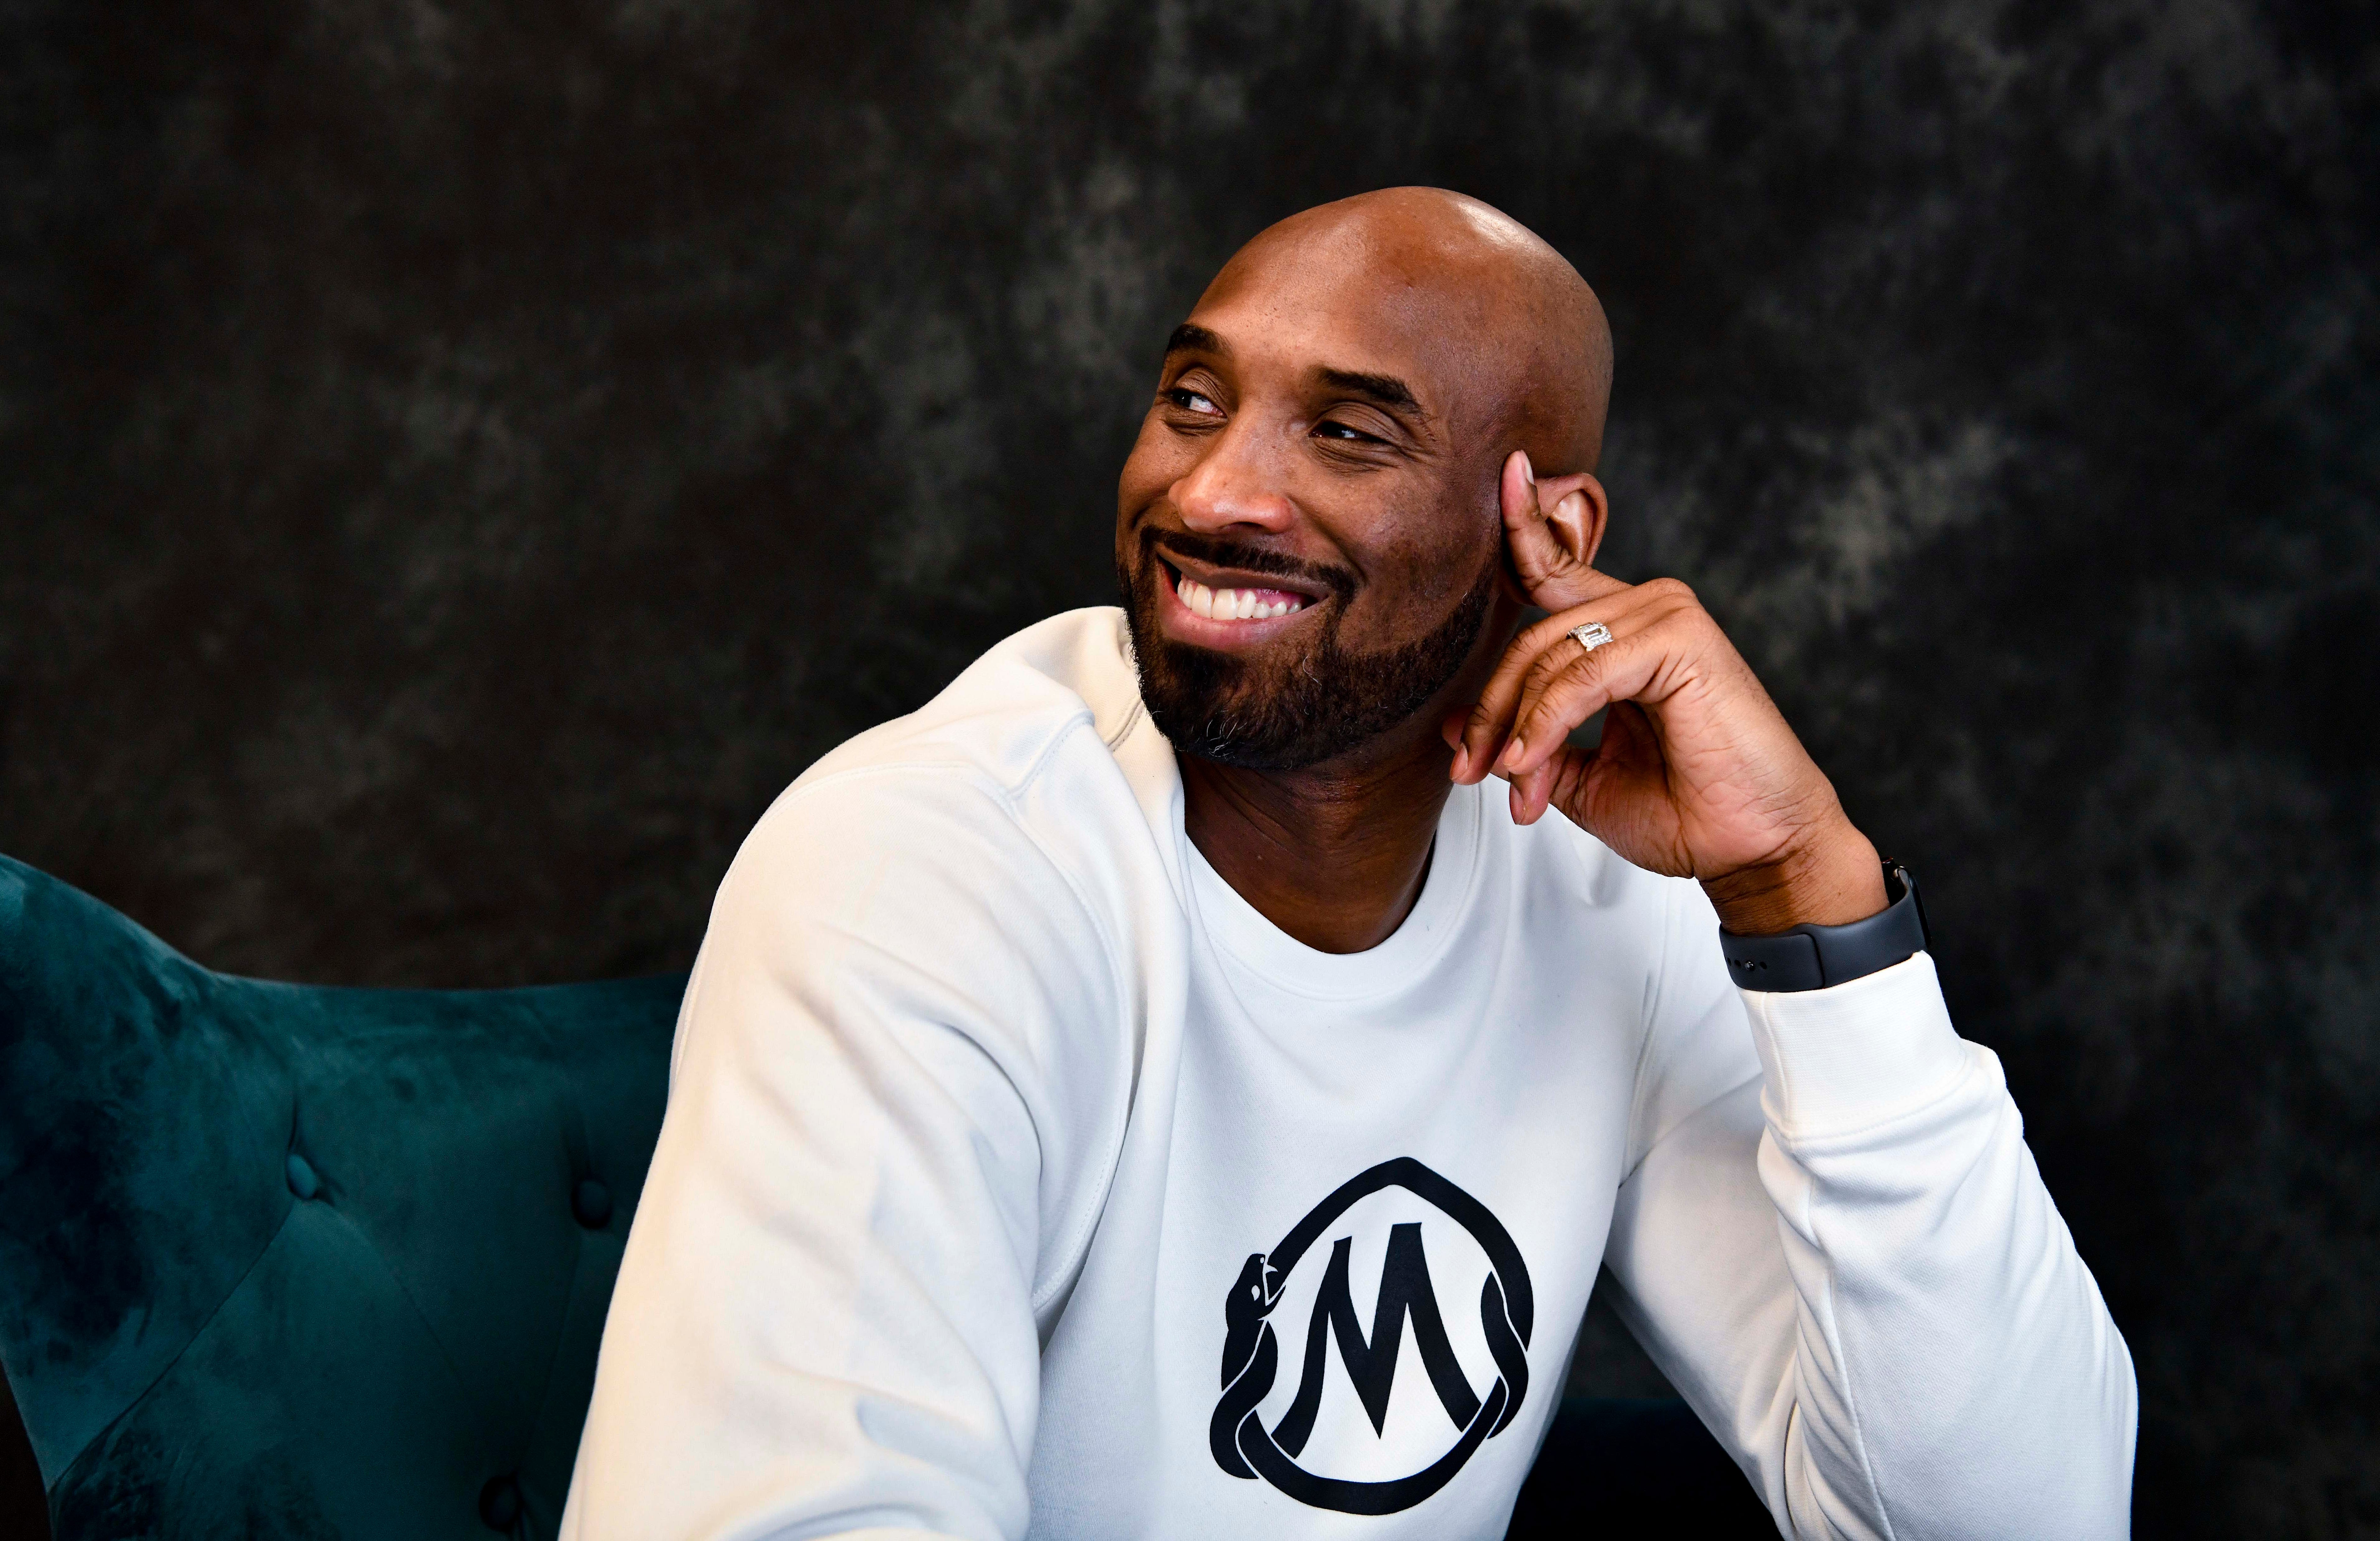 Kobe Bryant's Lower Merion teammates coped with losing legend